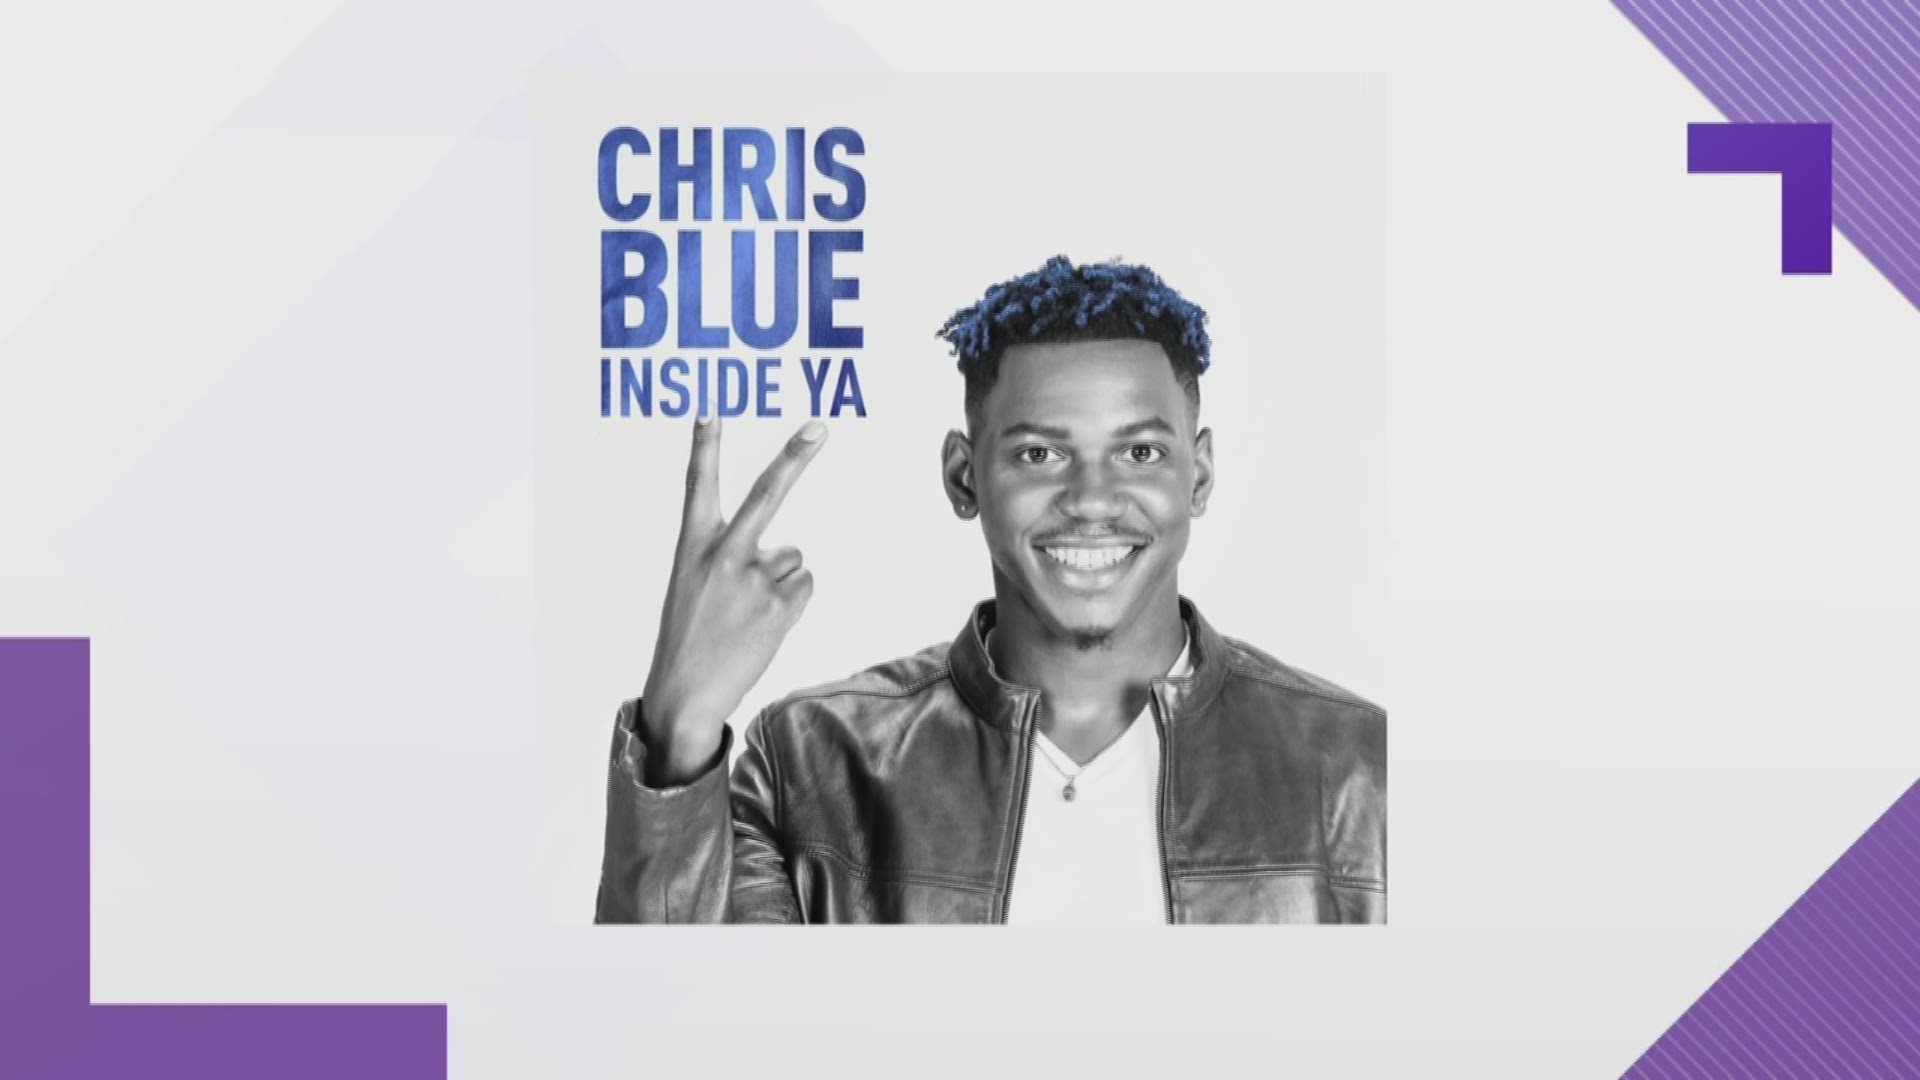 East Tennessee native and winner of The Voice Chris Blue drops a new single "Inside Ya" ahead of his new EP release.